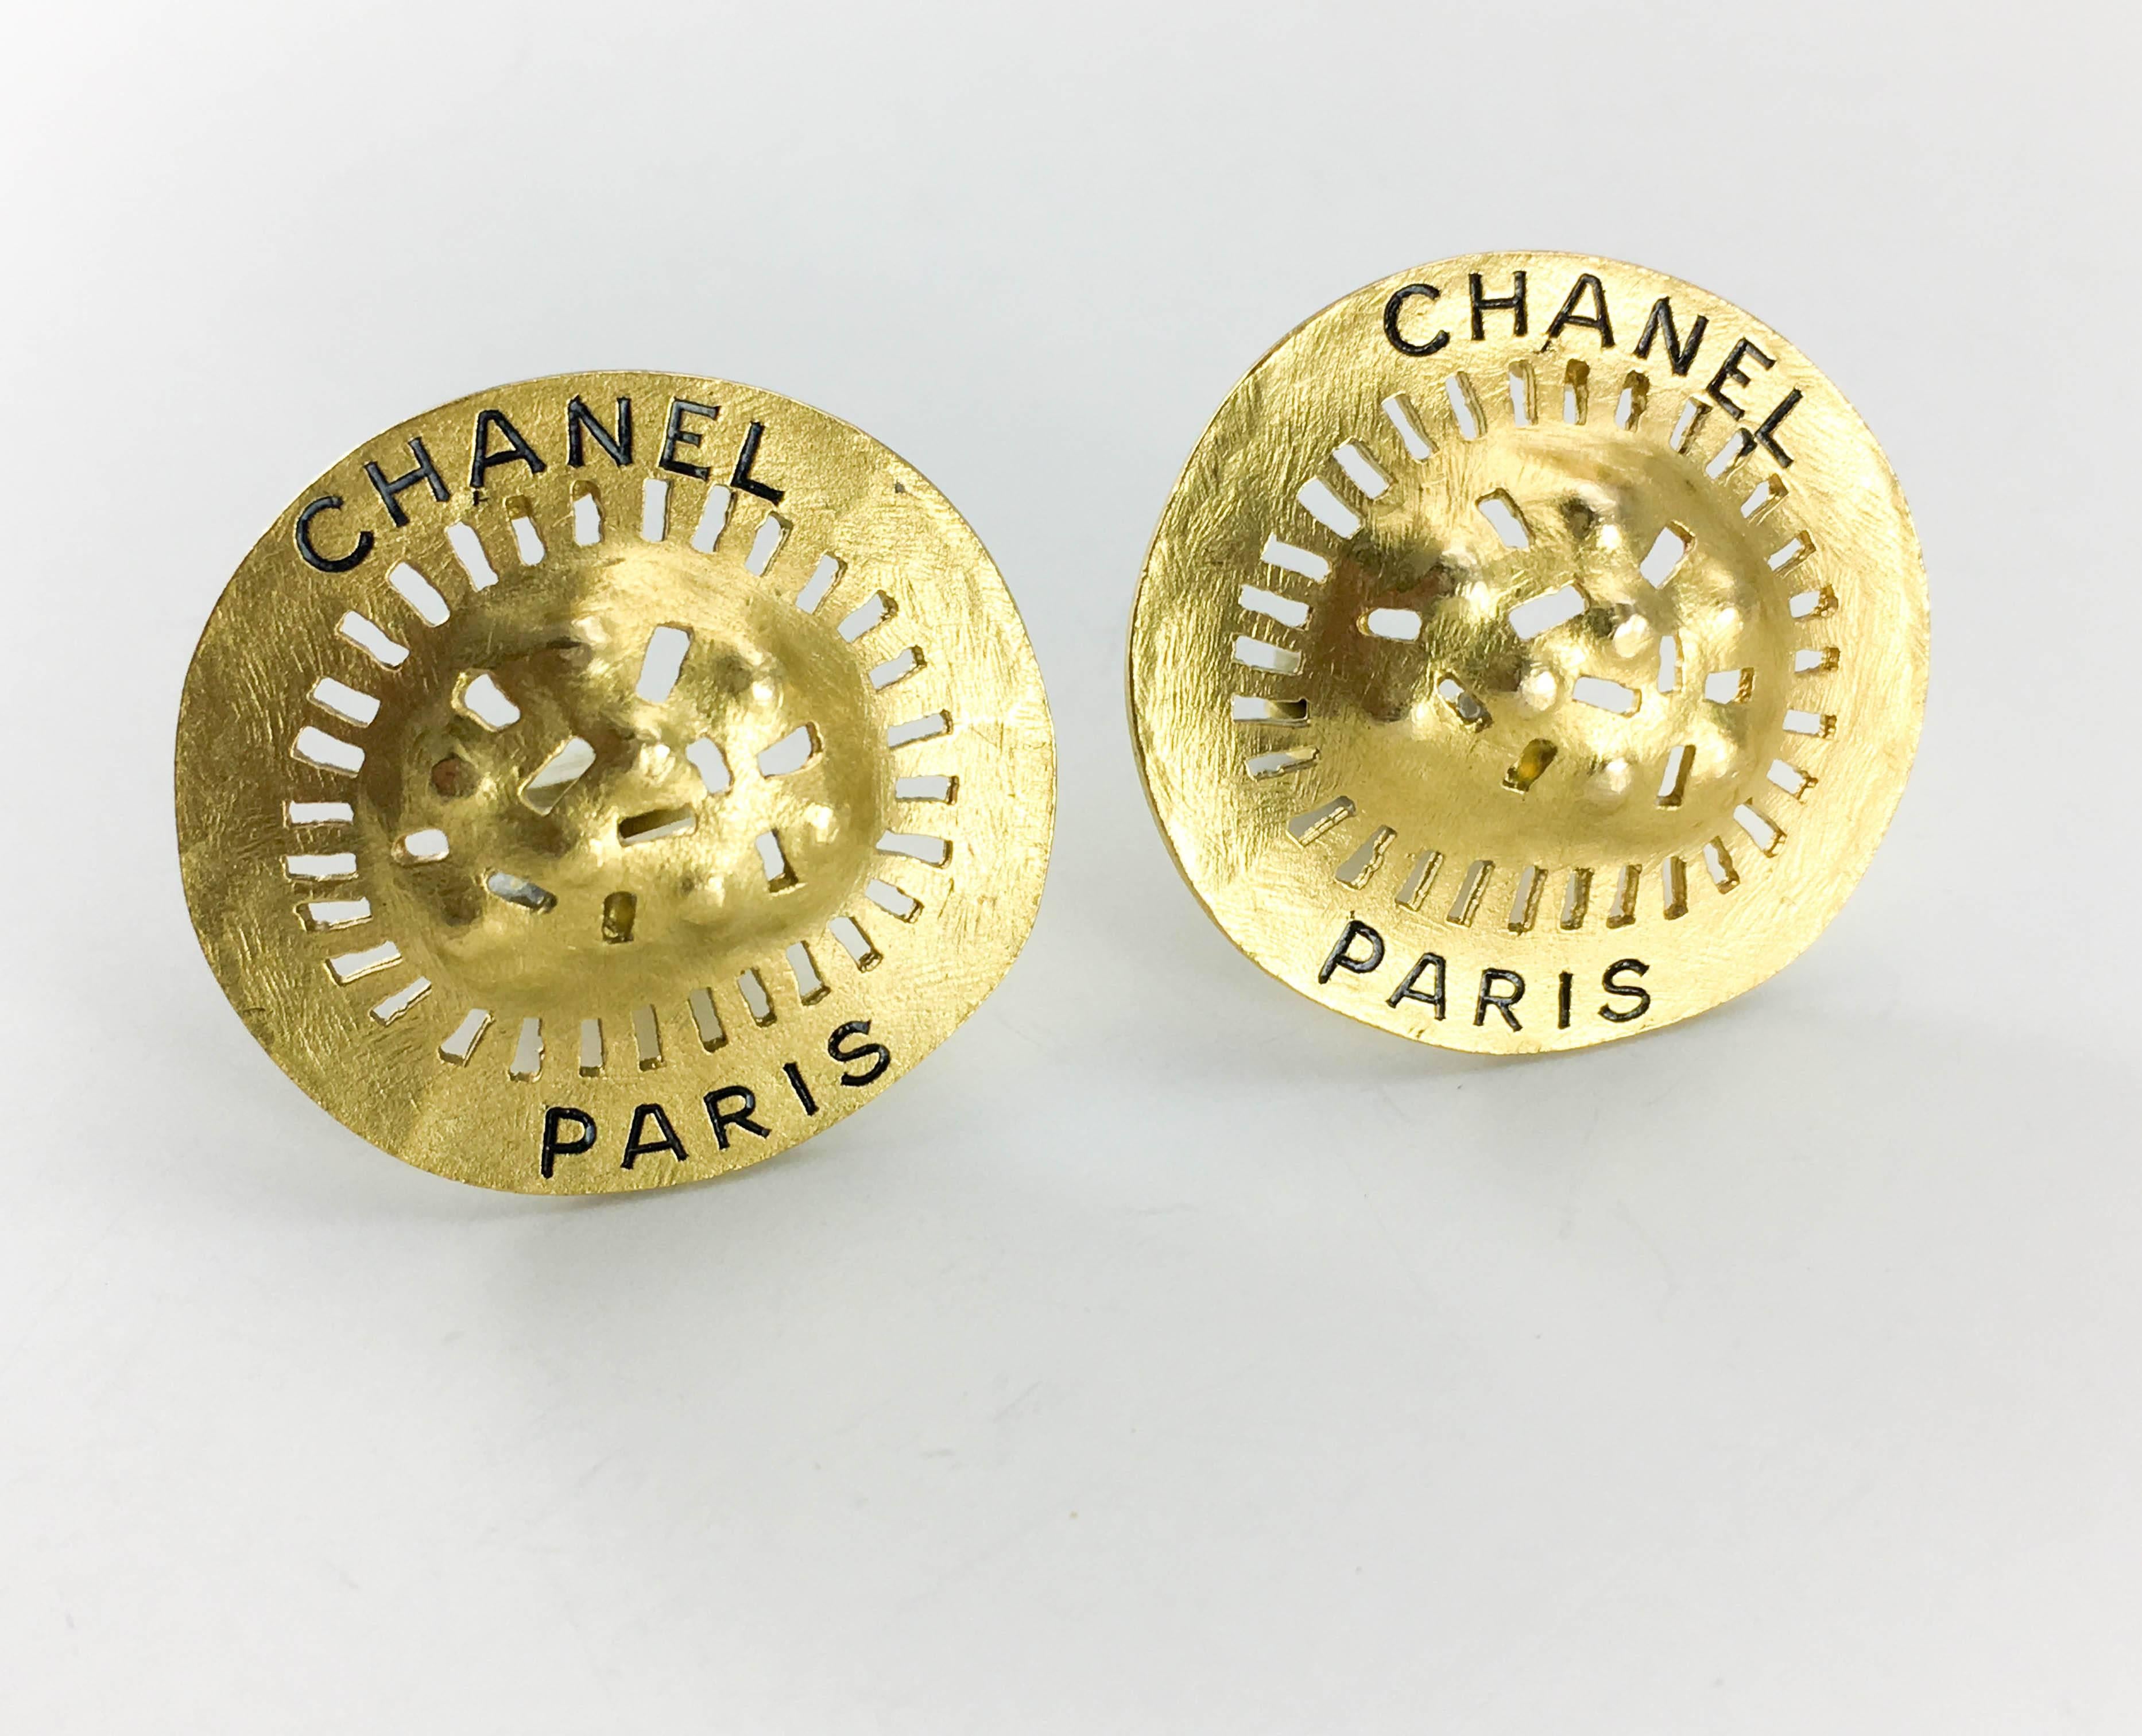 Vintage Chanel Gilt Clip-On Earrings. These striking earrings by Chanel are from the 1994 Spring / Summer collection. Made in gilt metal, the uneven design resembles a shield, with undulations and cut-outs, and read ‘Chanel Paris’. Chanel signed on